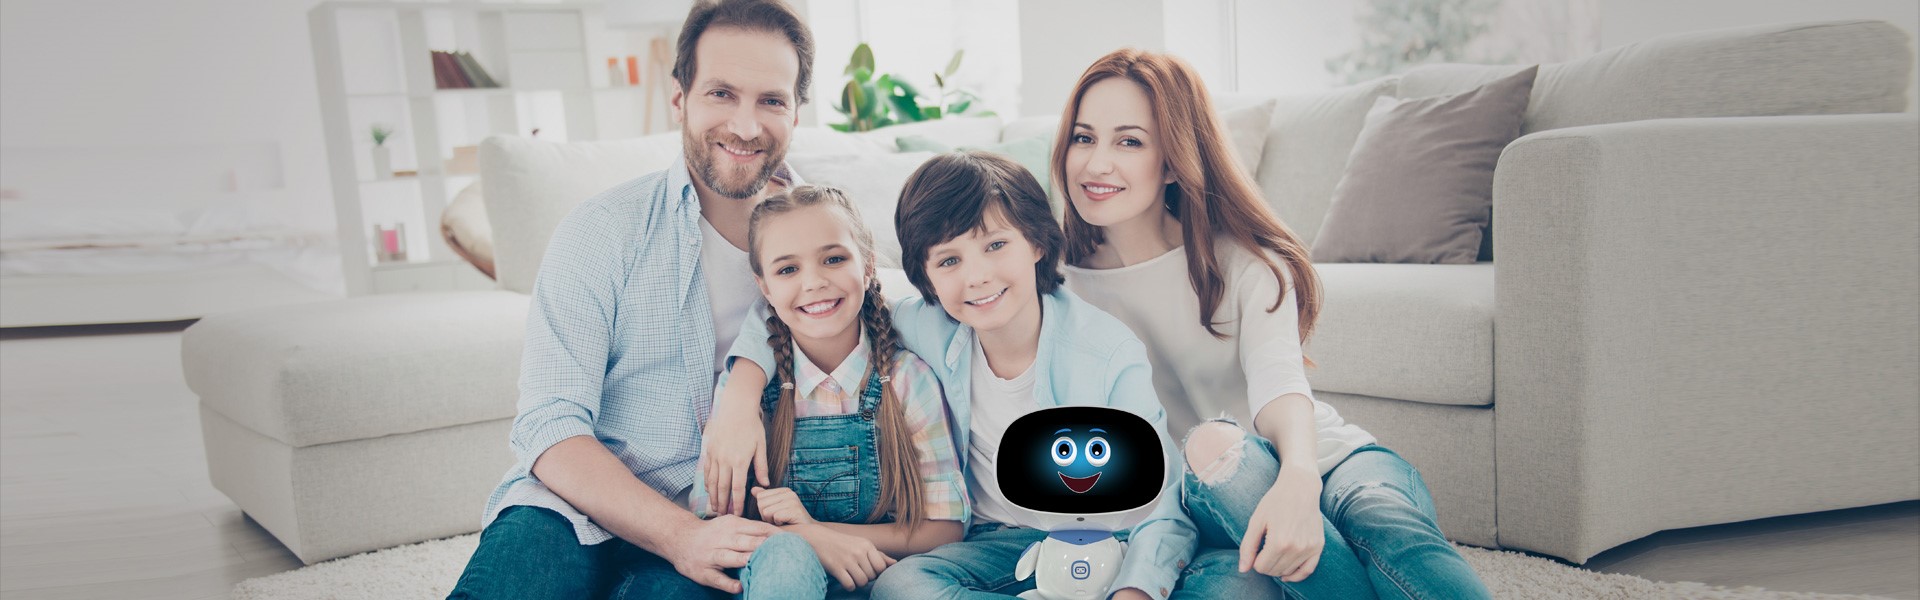 5 Huge Ways Misa Robot Can Make You a Better and Happier Parent.